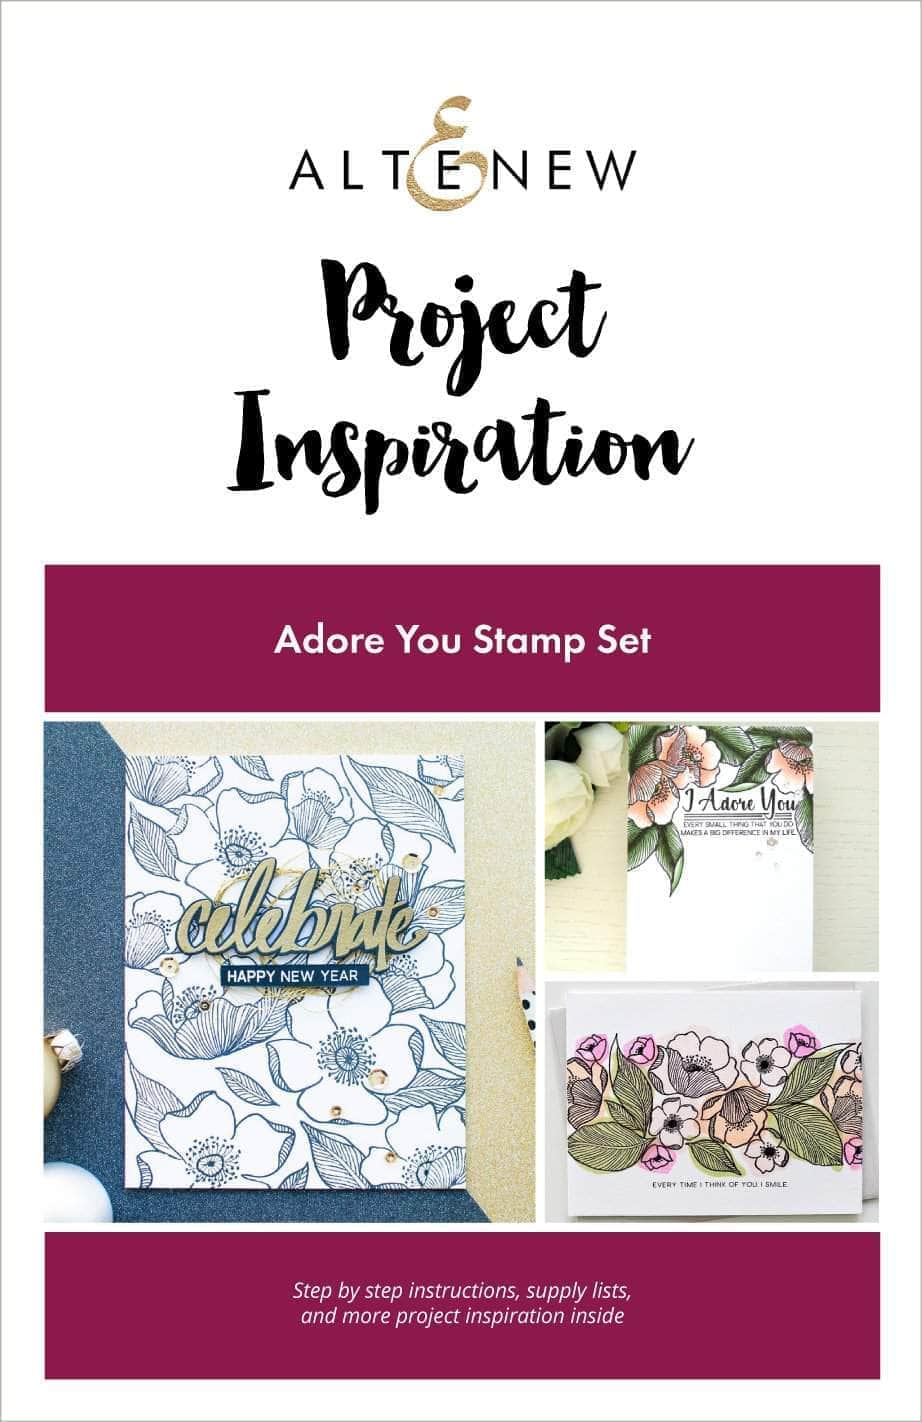 Printed Media Adore You Project Inspiration Guide